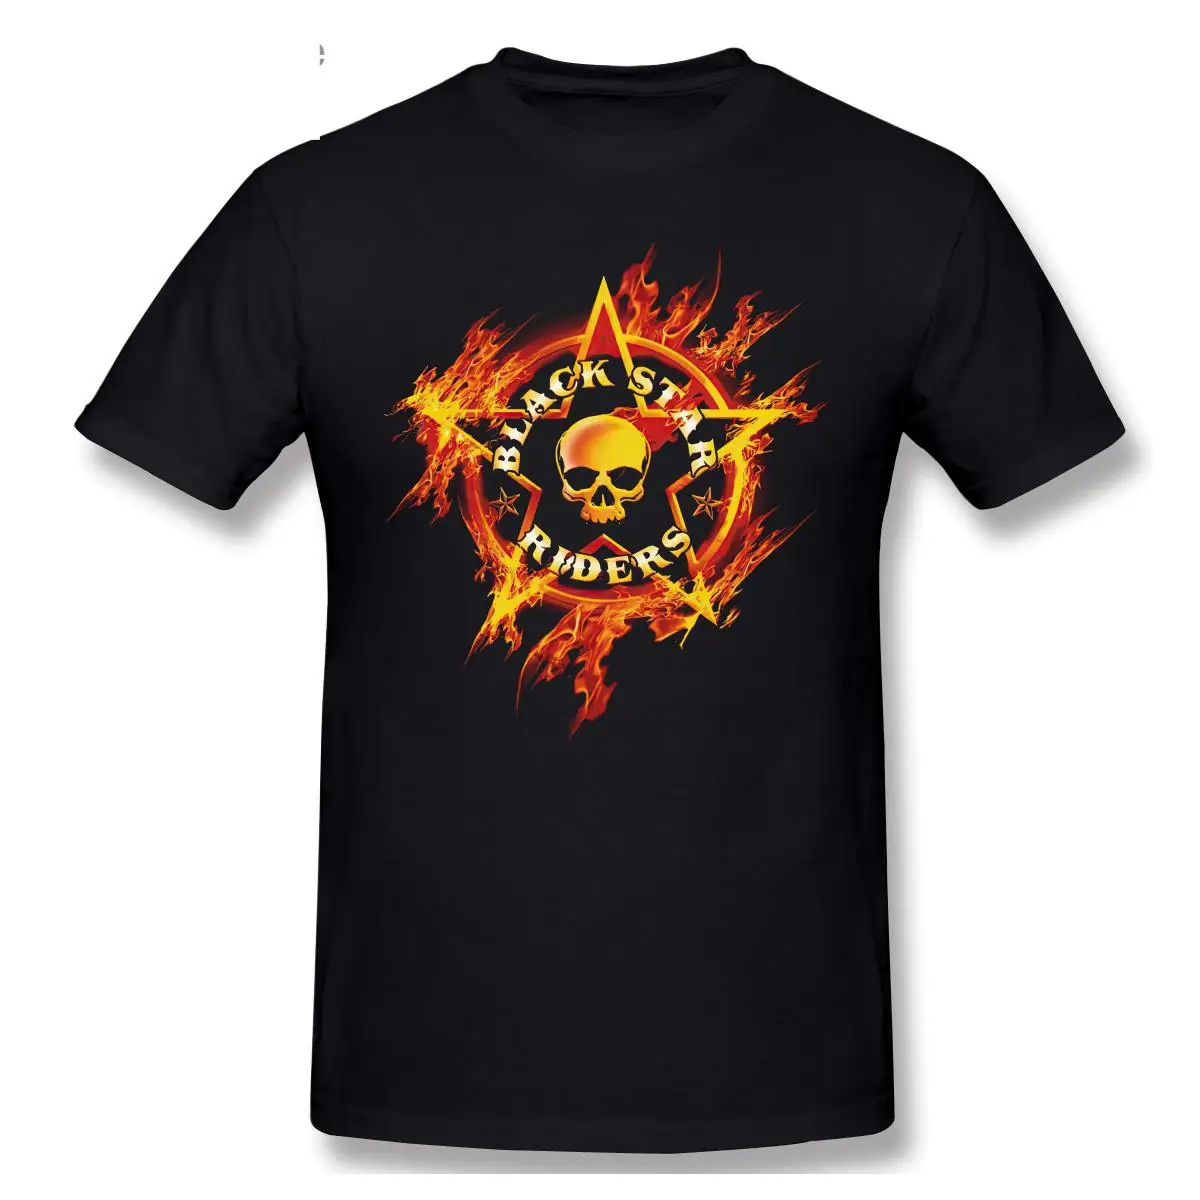 

Official BLACK STAR RIDERS - Flames - Men Black T-Shirt NEW Short Sleeve Casual Men Fashion O-neck 100% Cotton T-Shirts Tee Top